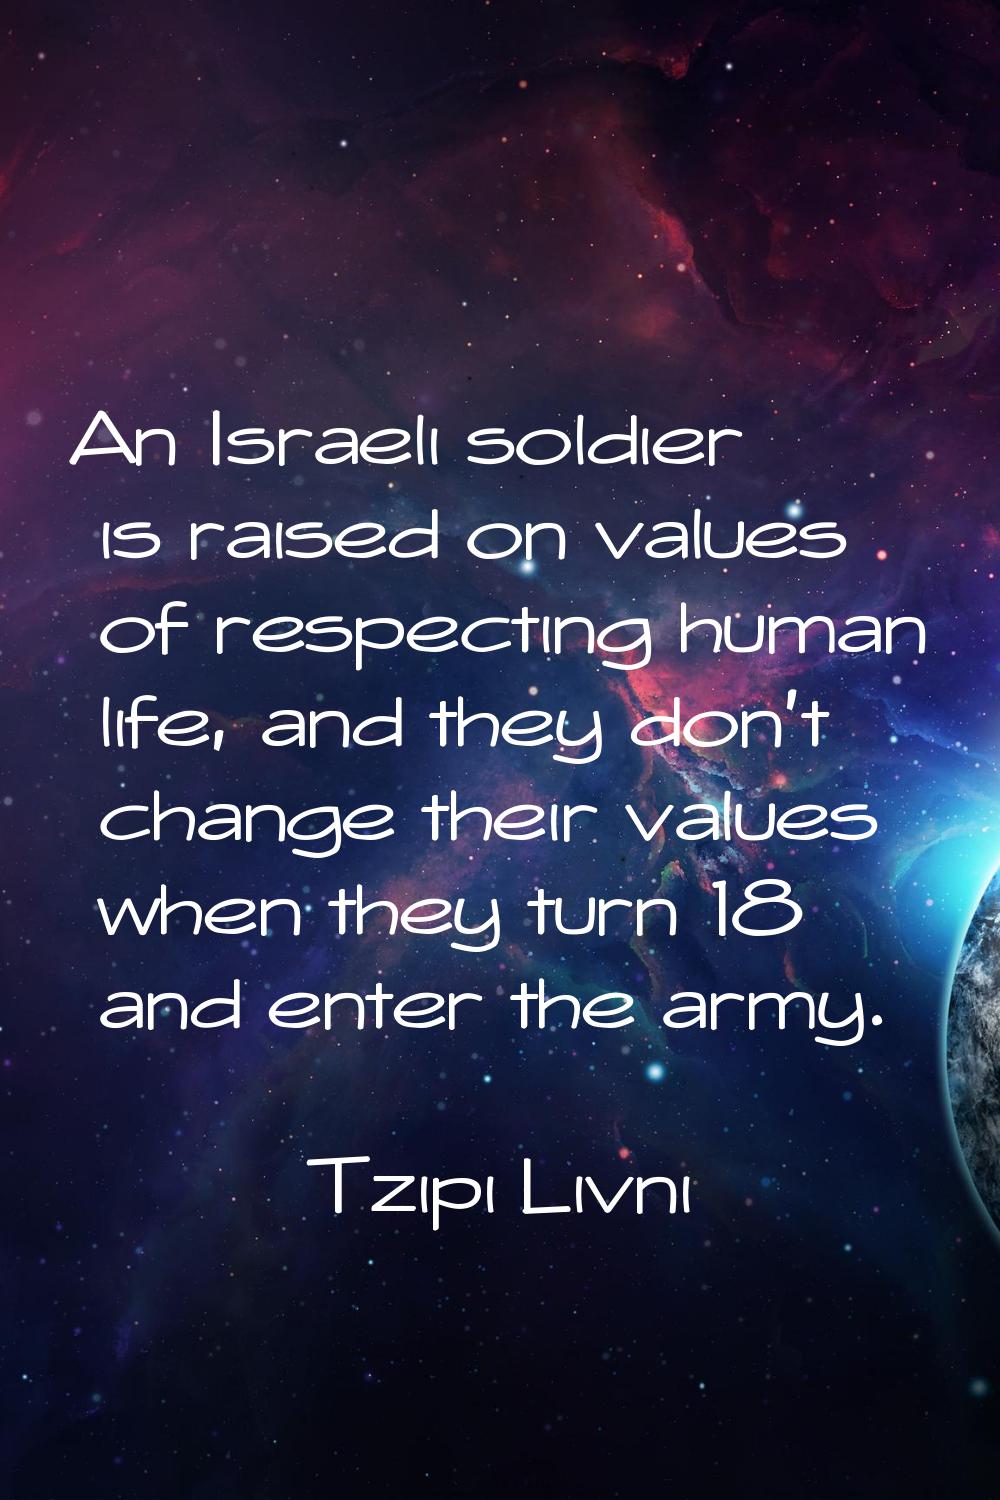 An Israeli soldier is raised on values of respecting human life, and they don't change their values